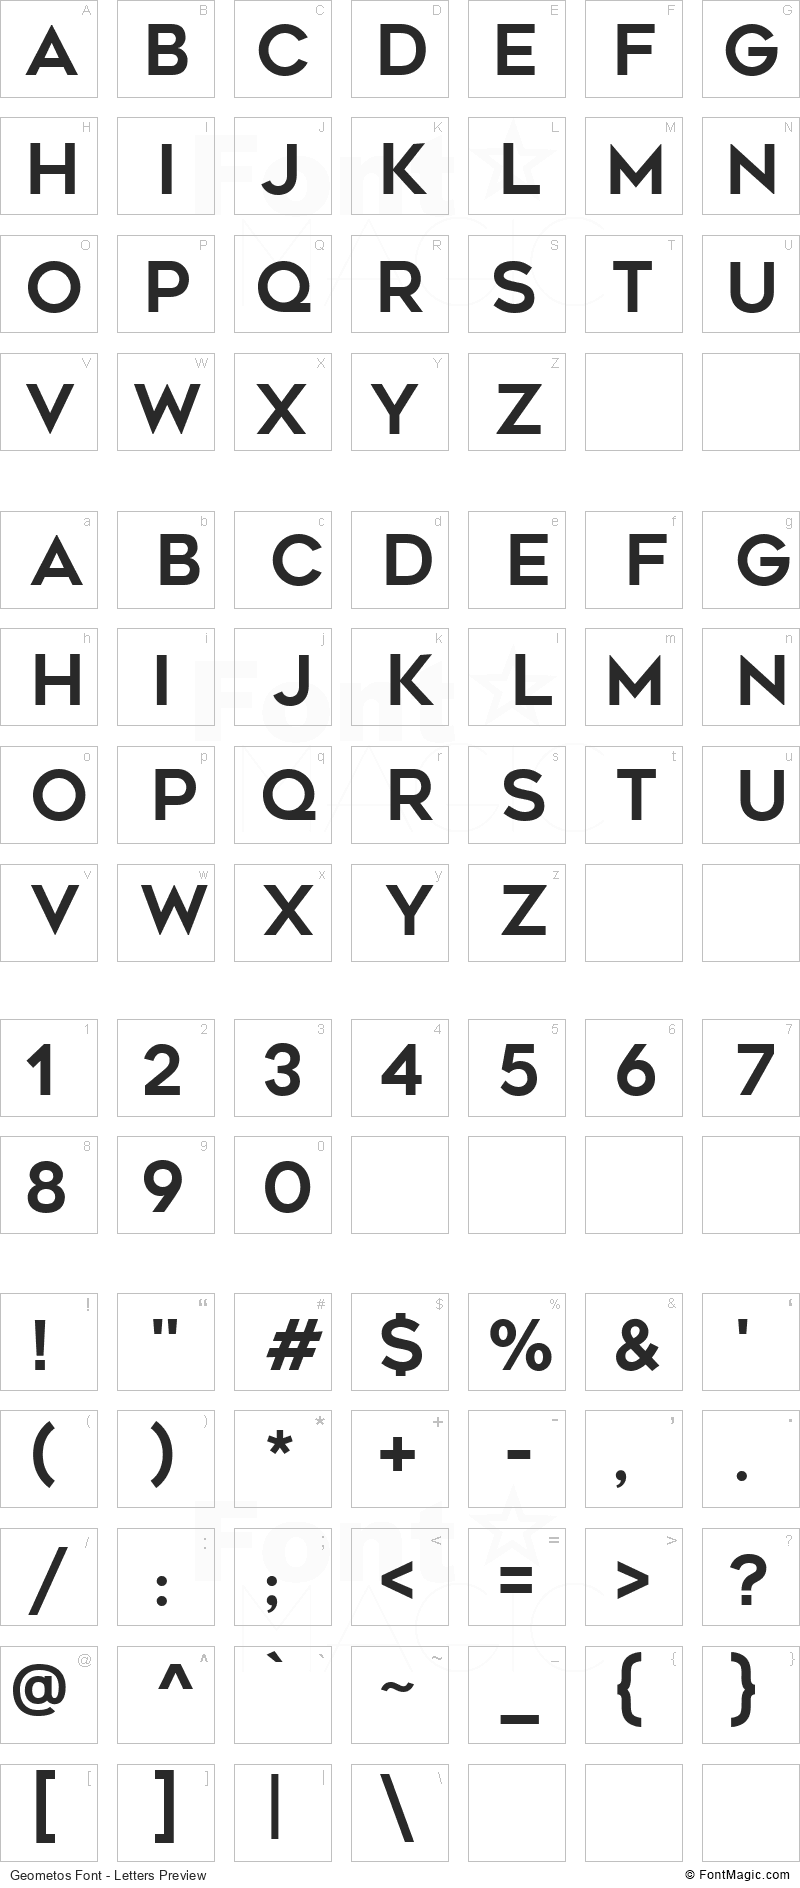 Geometos Font - All Latters Preview Chart